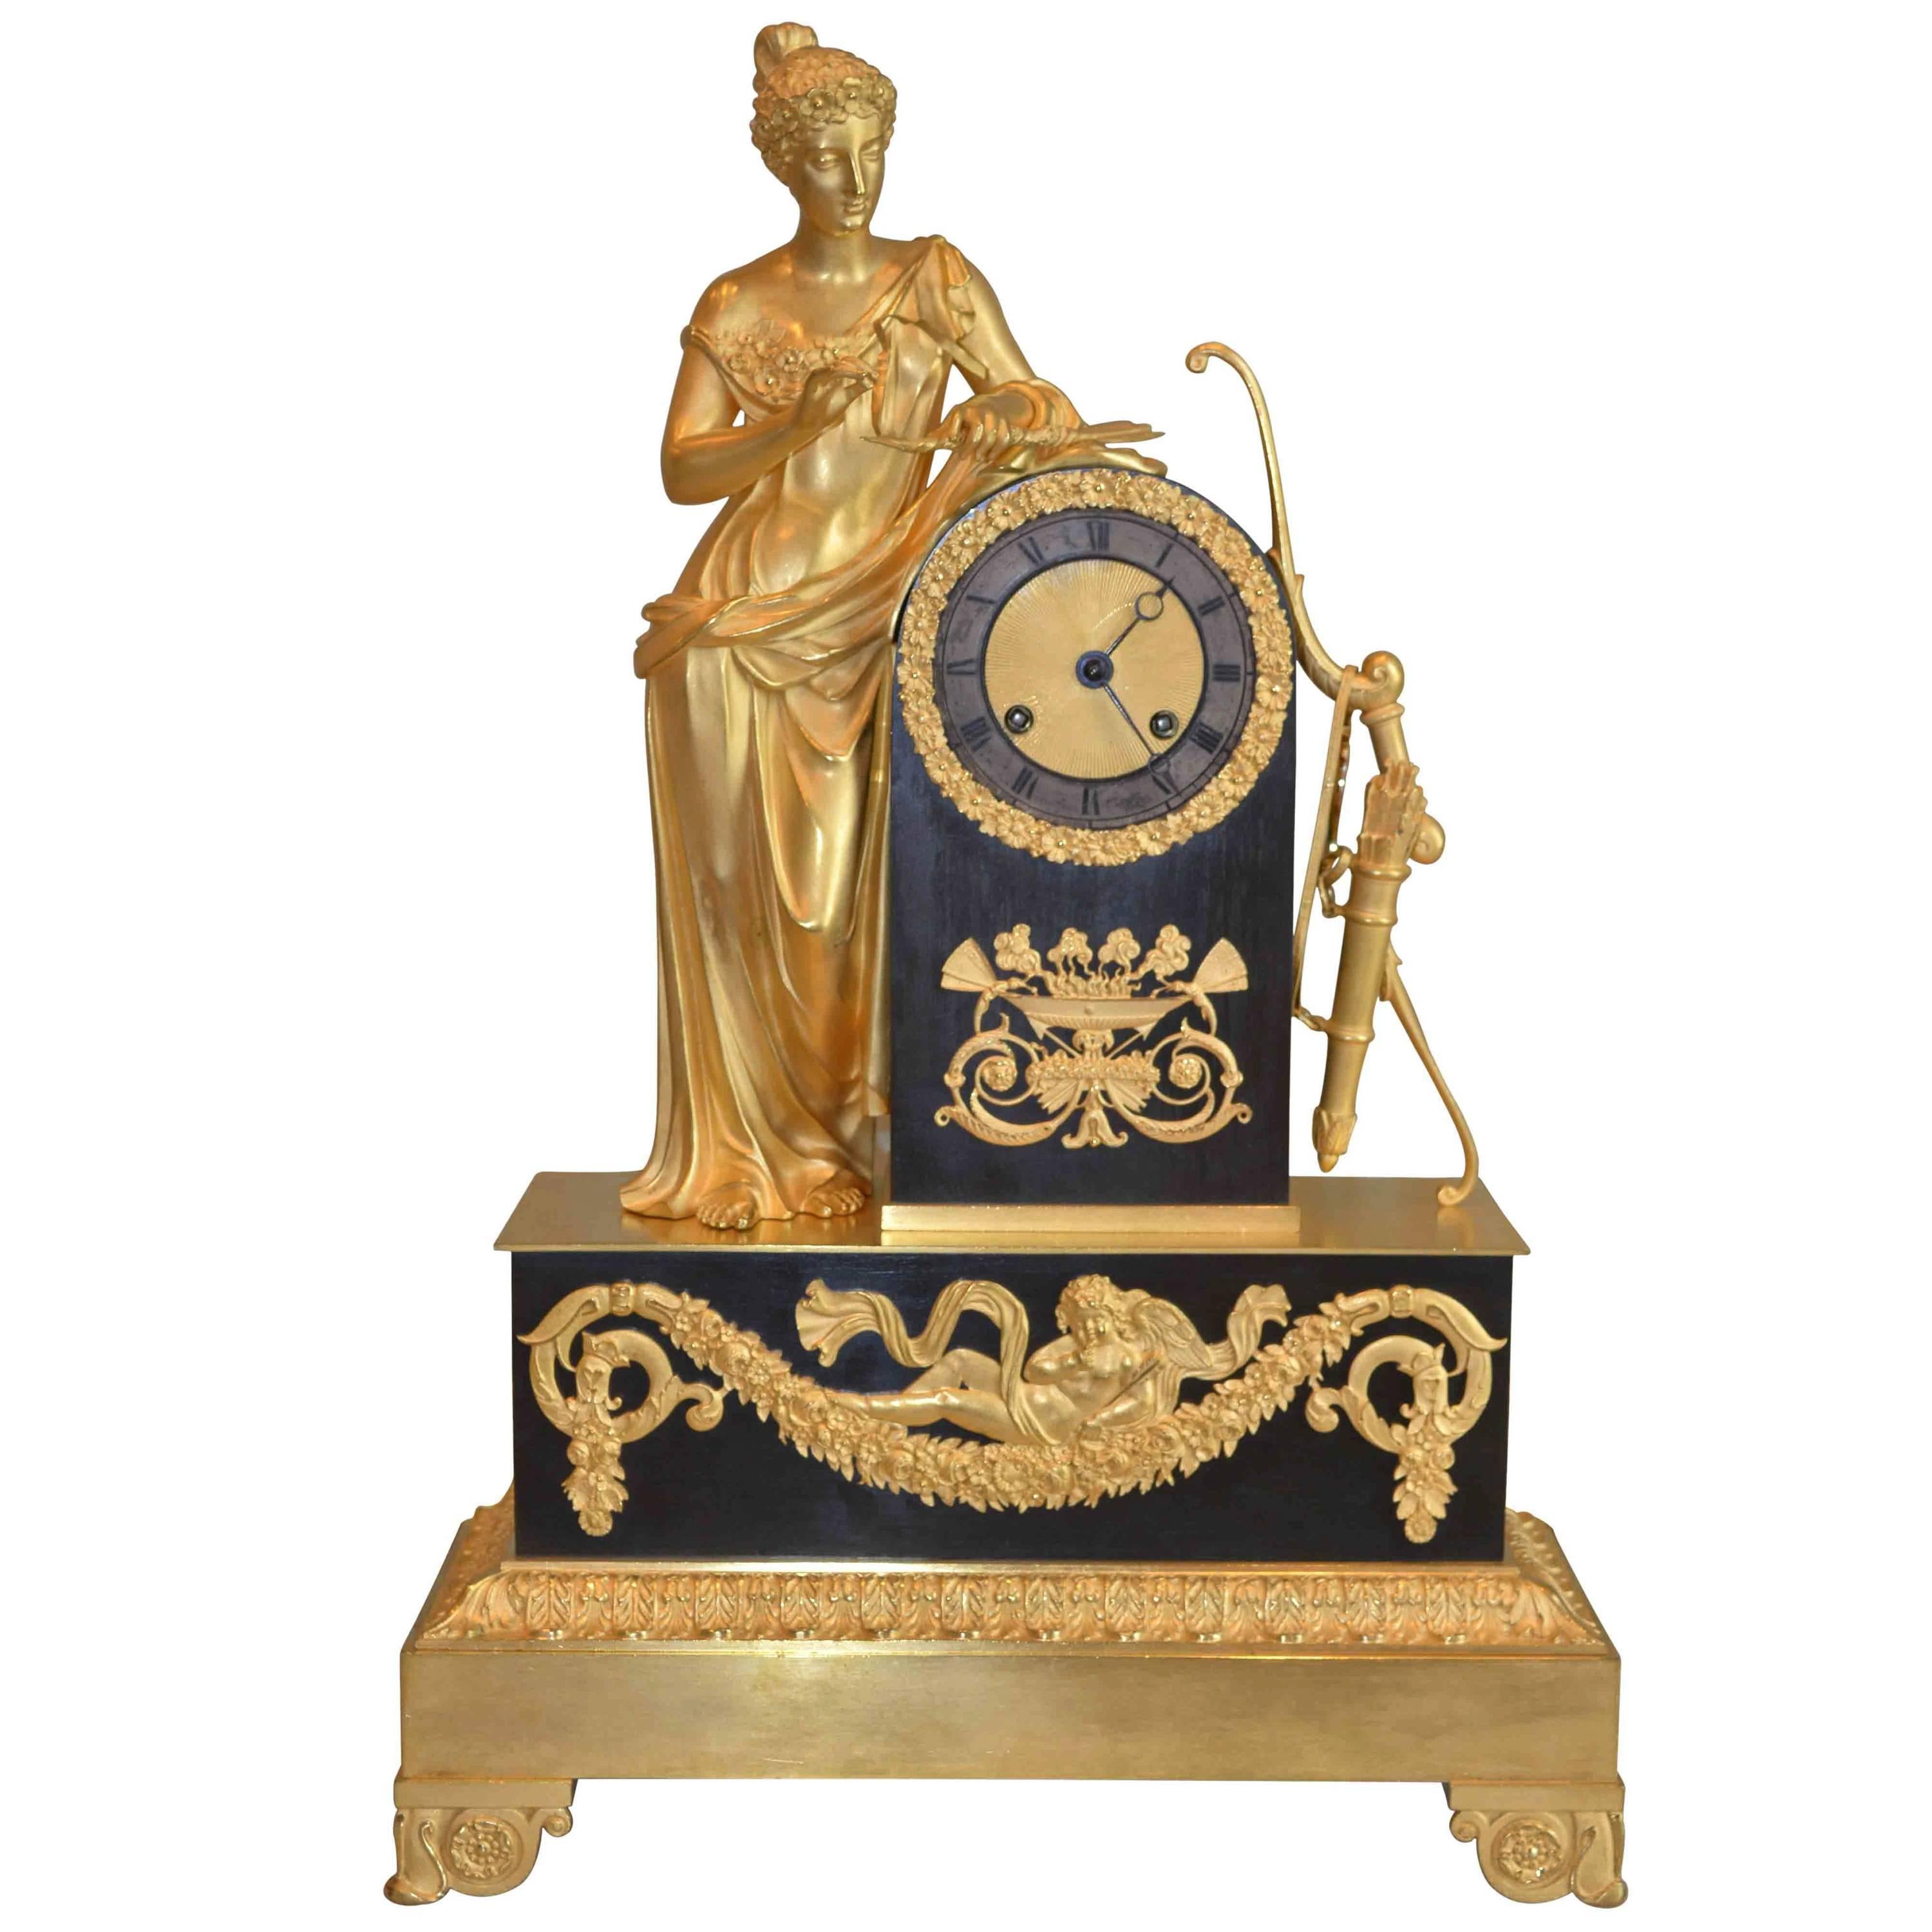 Empire Clock with a Standing Psyche or Venus